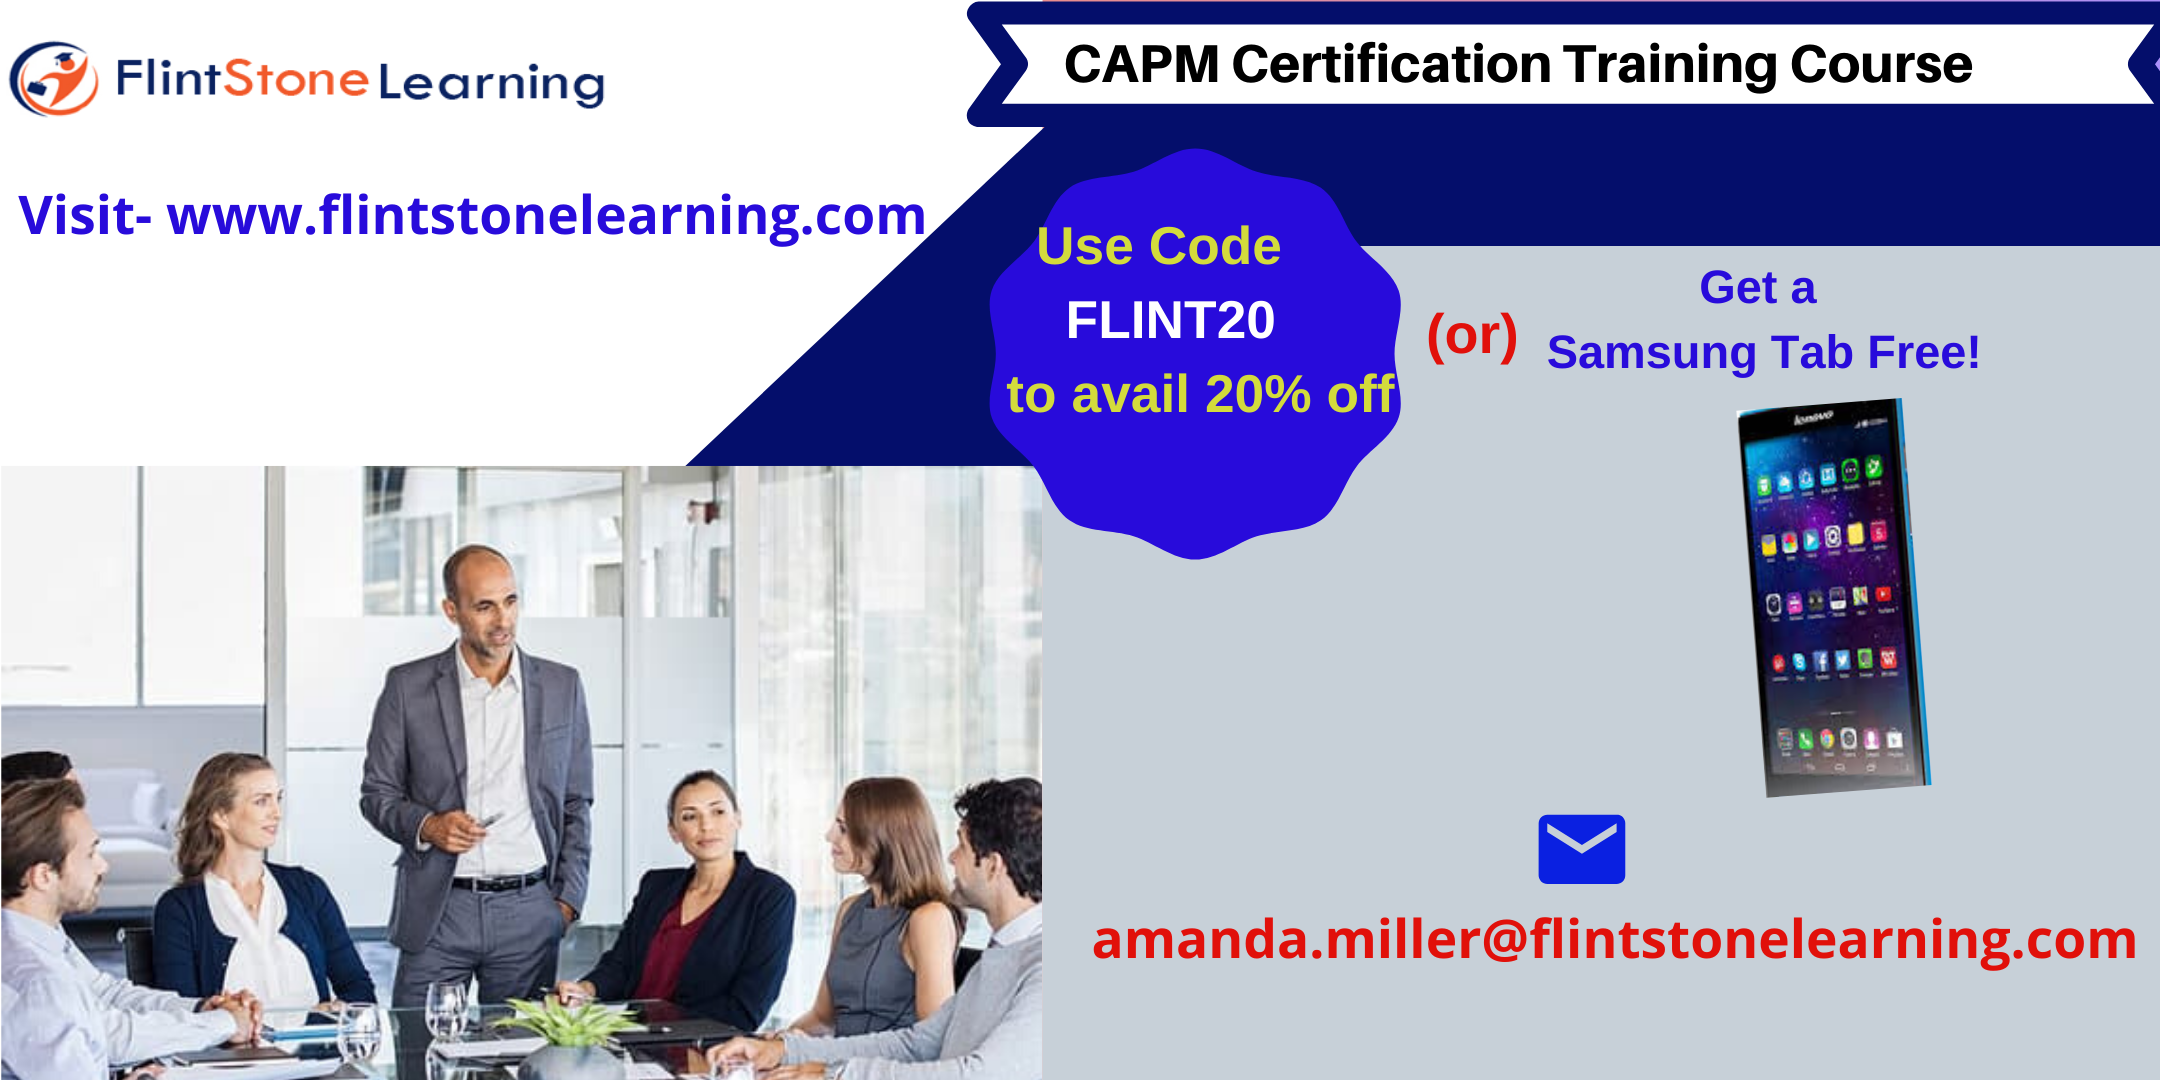 CAPM Certification Training Course in Pharr, TX